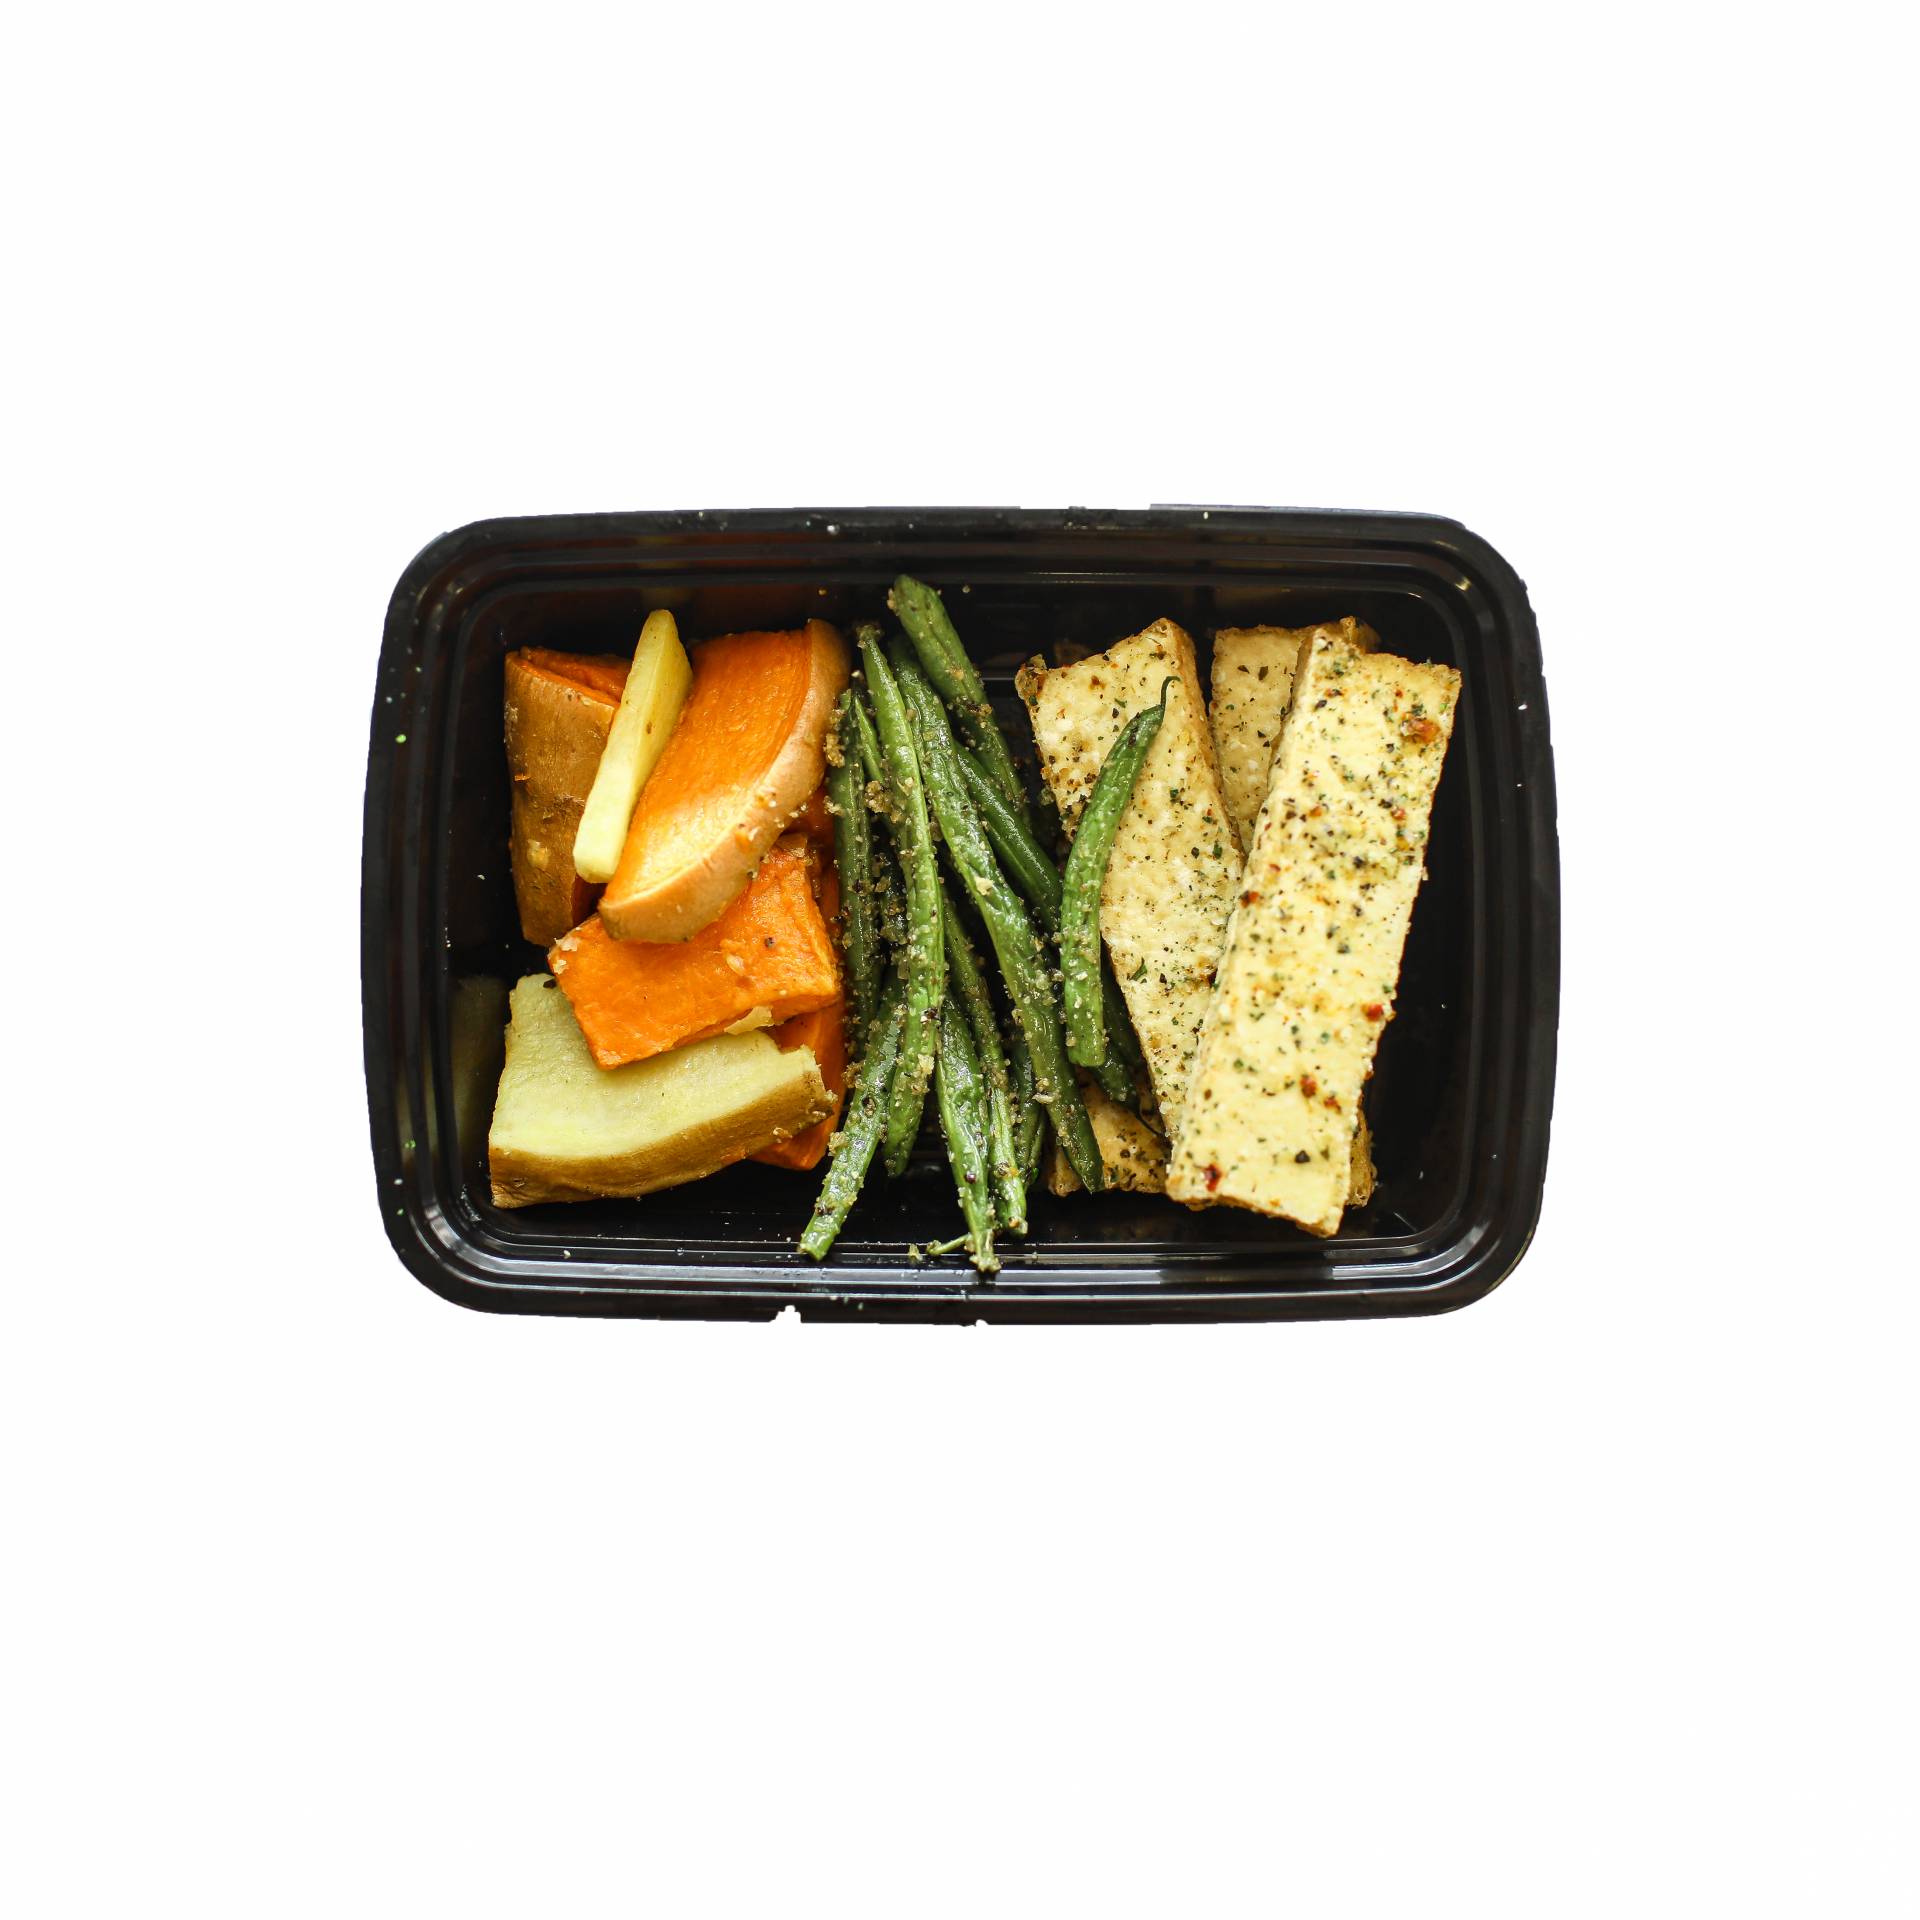 Grilled Tofu with Sweet Potatoes & Green Beans